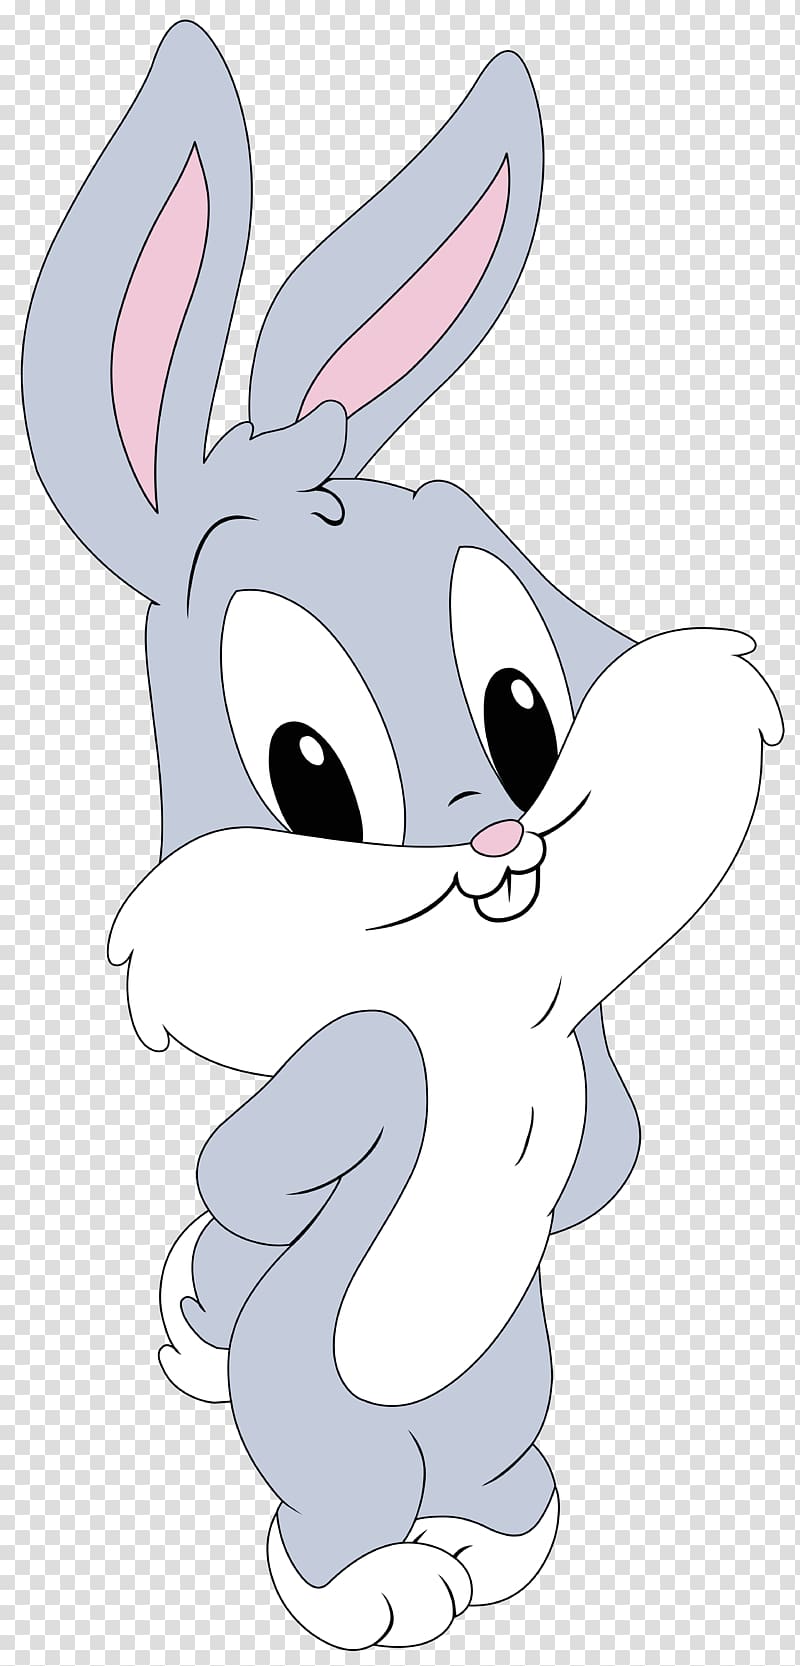 Baby Bugs Bunny , Bugs Bunny Mickey Mouse Babs Bunny , Bugs Bunny Baby transparent background PNG clipart